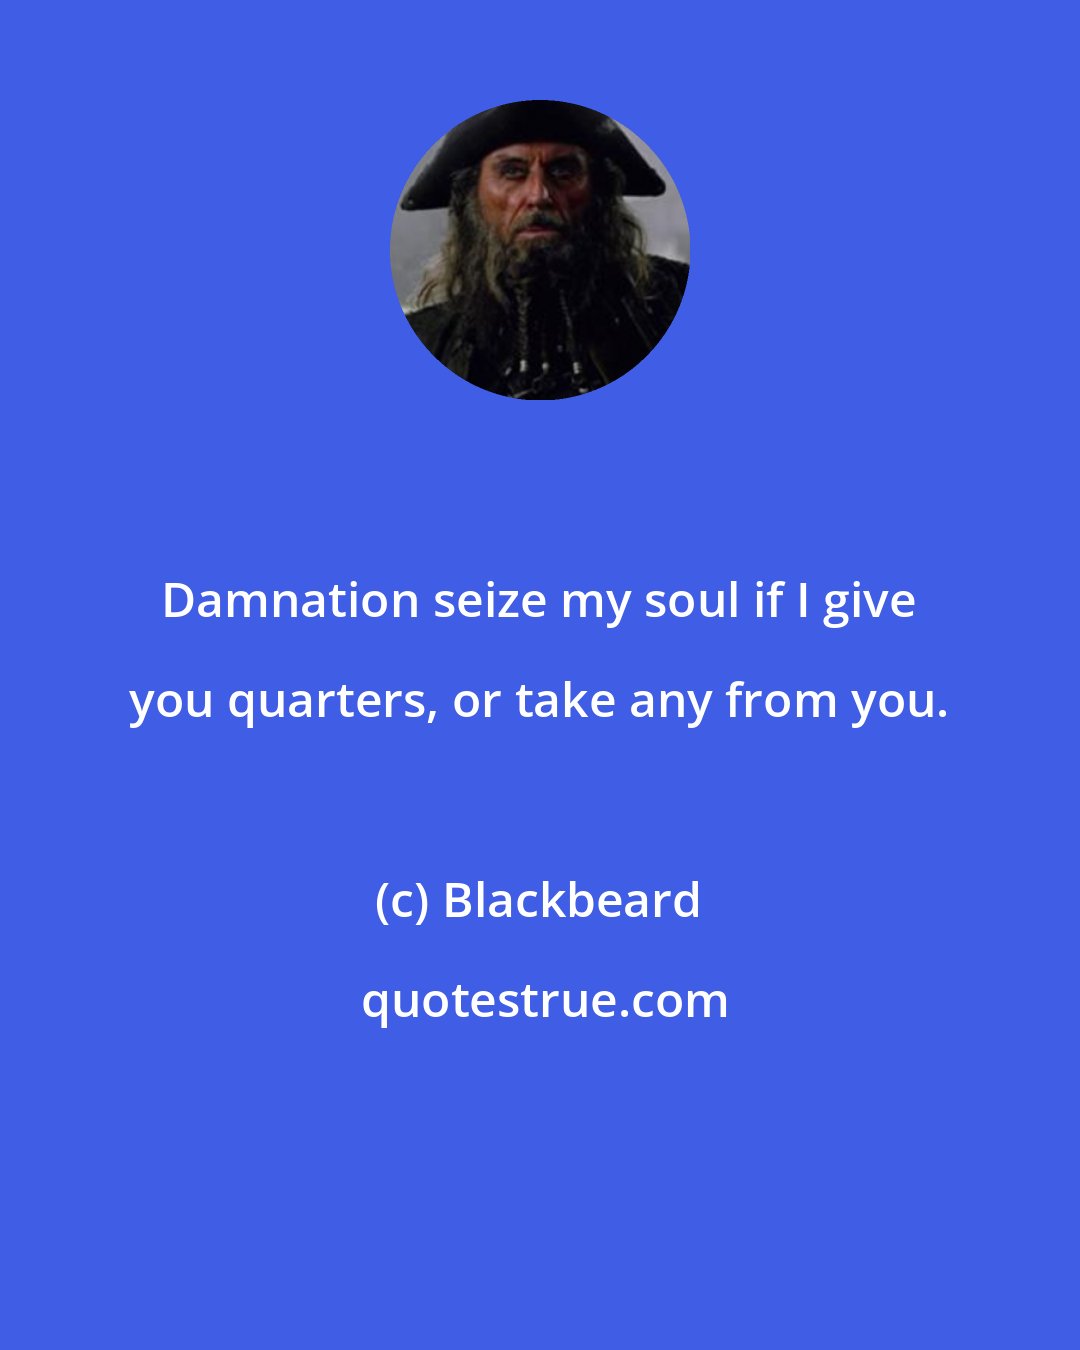 Blackbeard: Damnation seize my soul if I give you quarters, or take any from you.